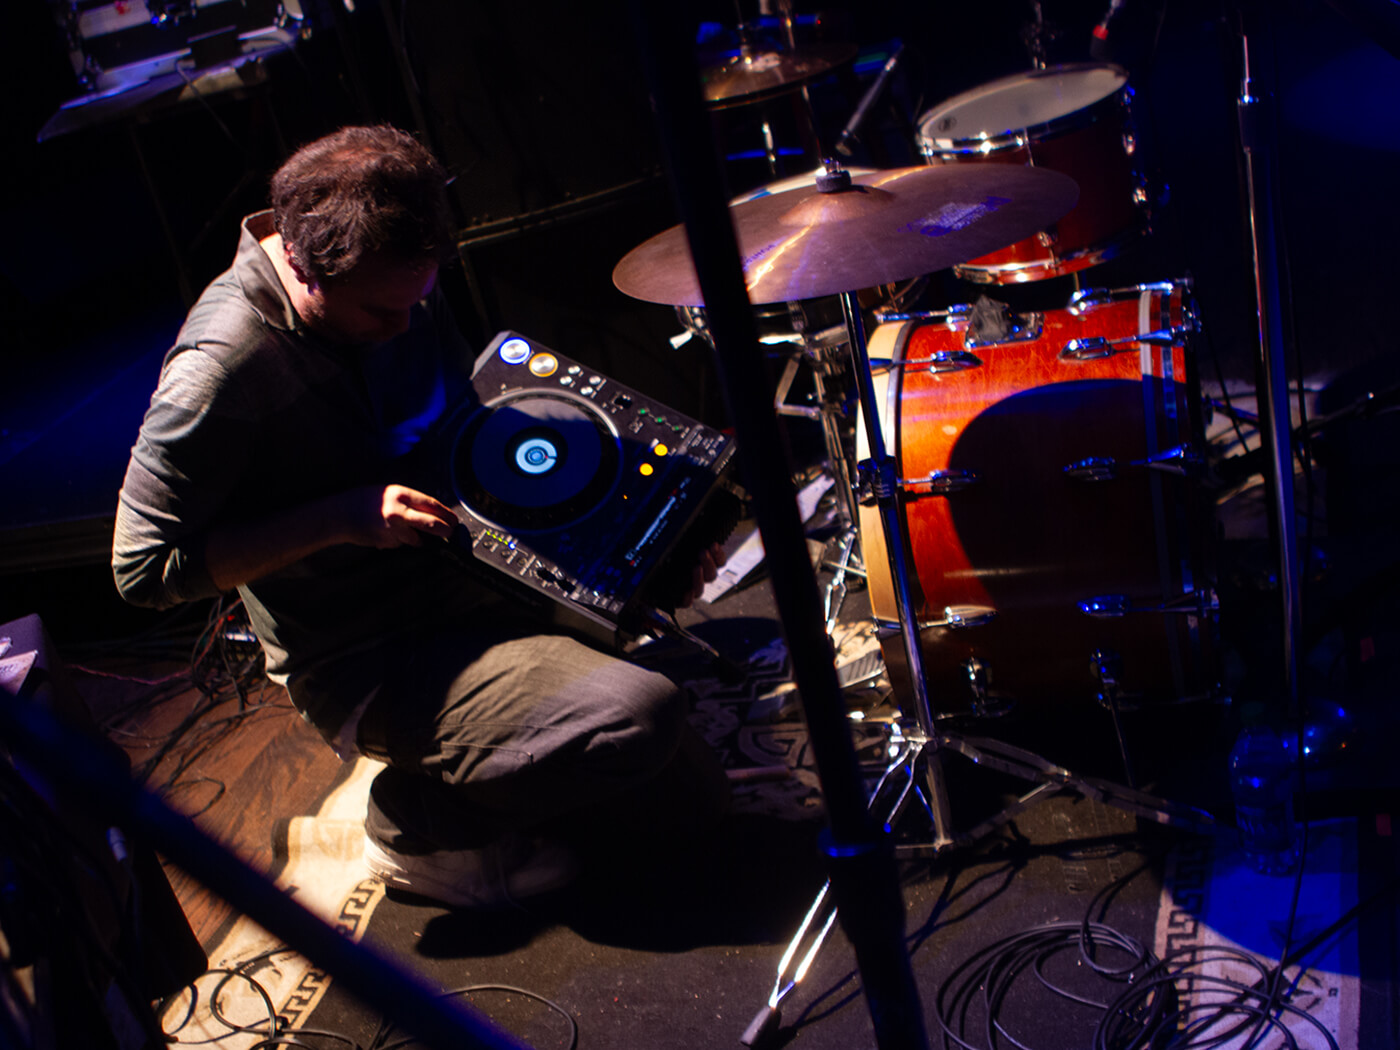 Cut Chemist onstage with a turntable, photo by Cut Chemist